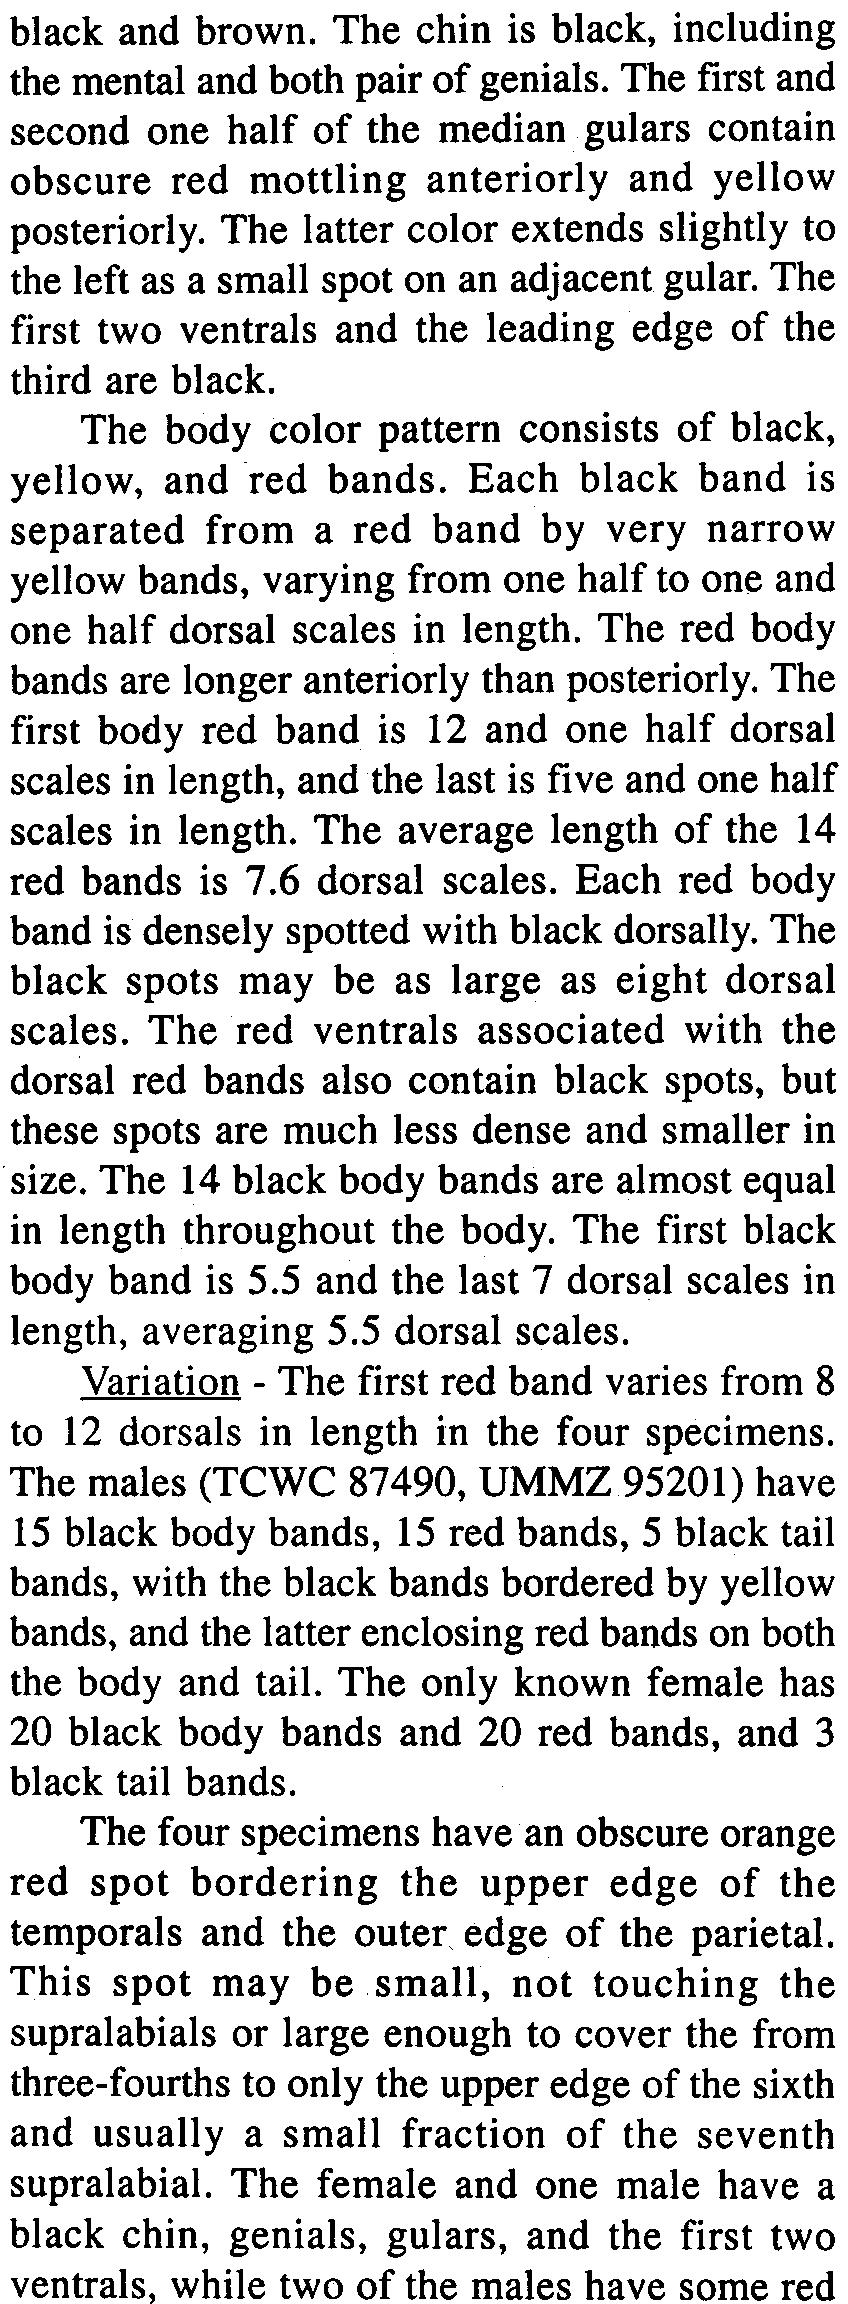 The first body red band is 12 and one half dorsal scales in length, and the last is five and one half scales in length. The average length of the 14 red bands is 7.6 dorsal scales.